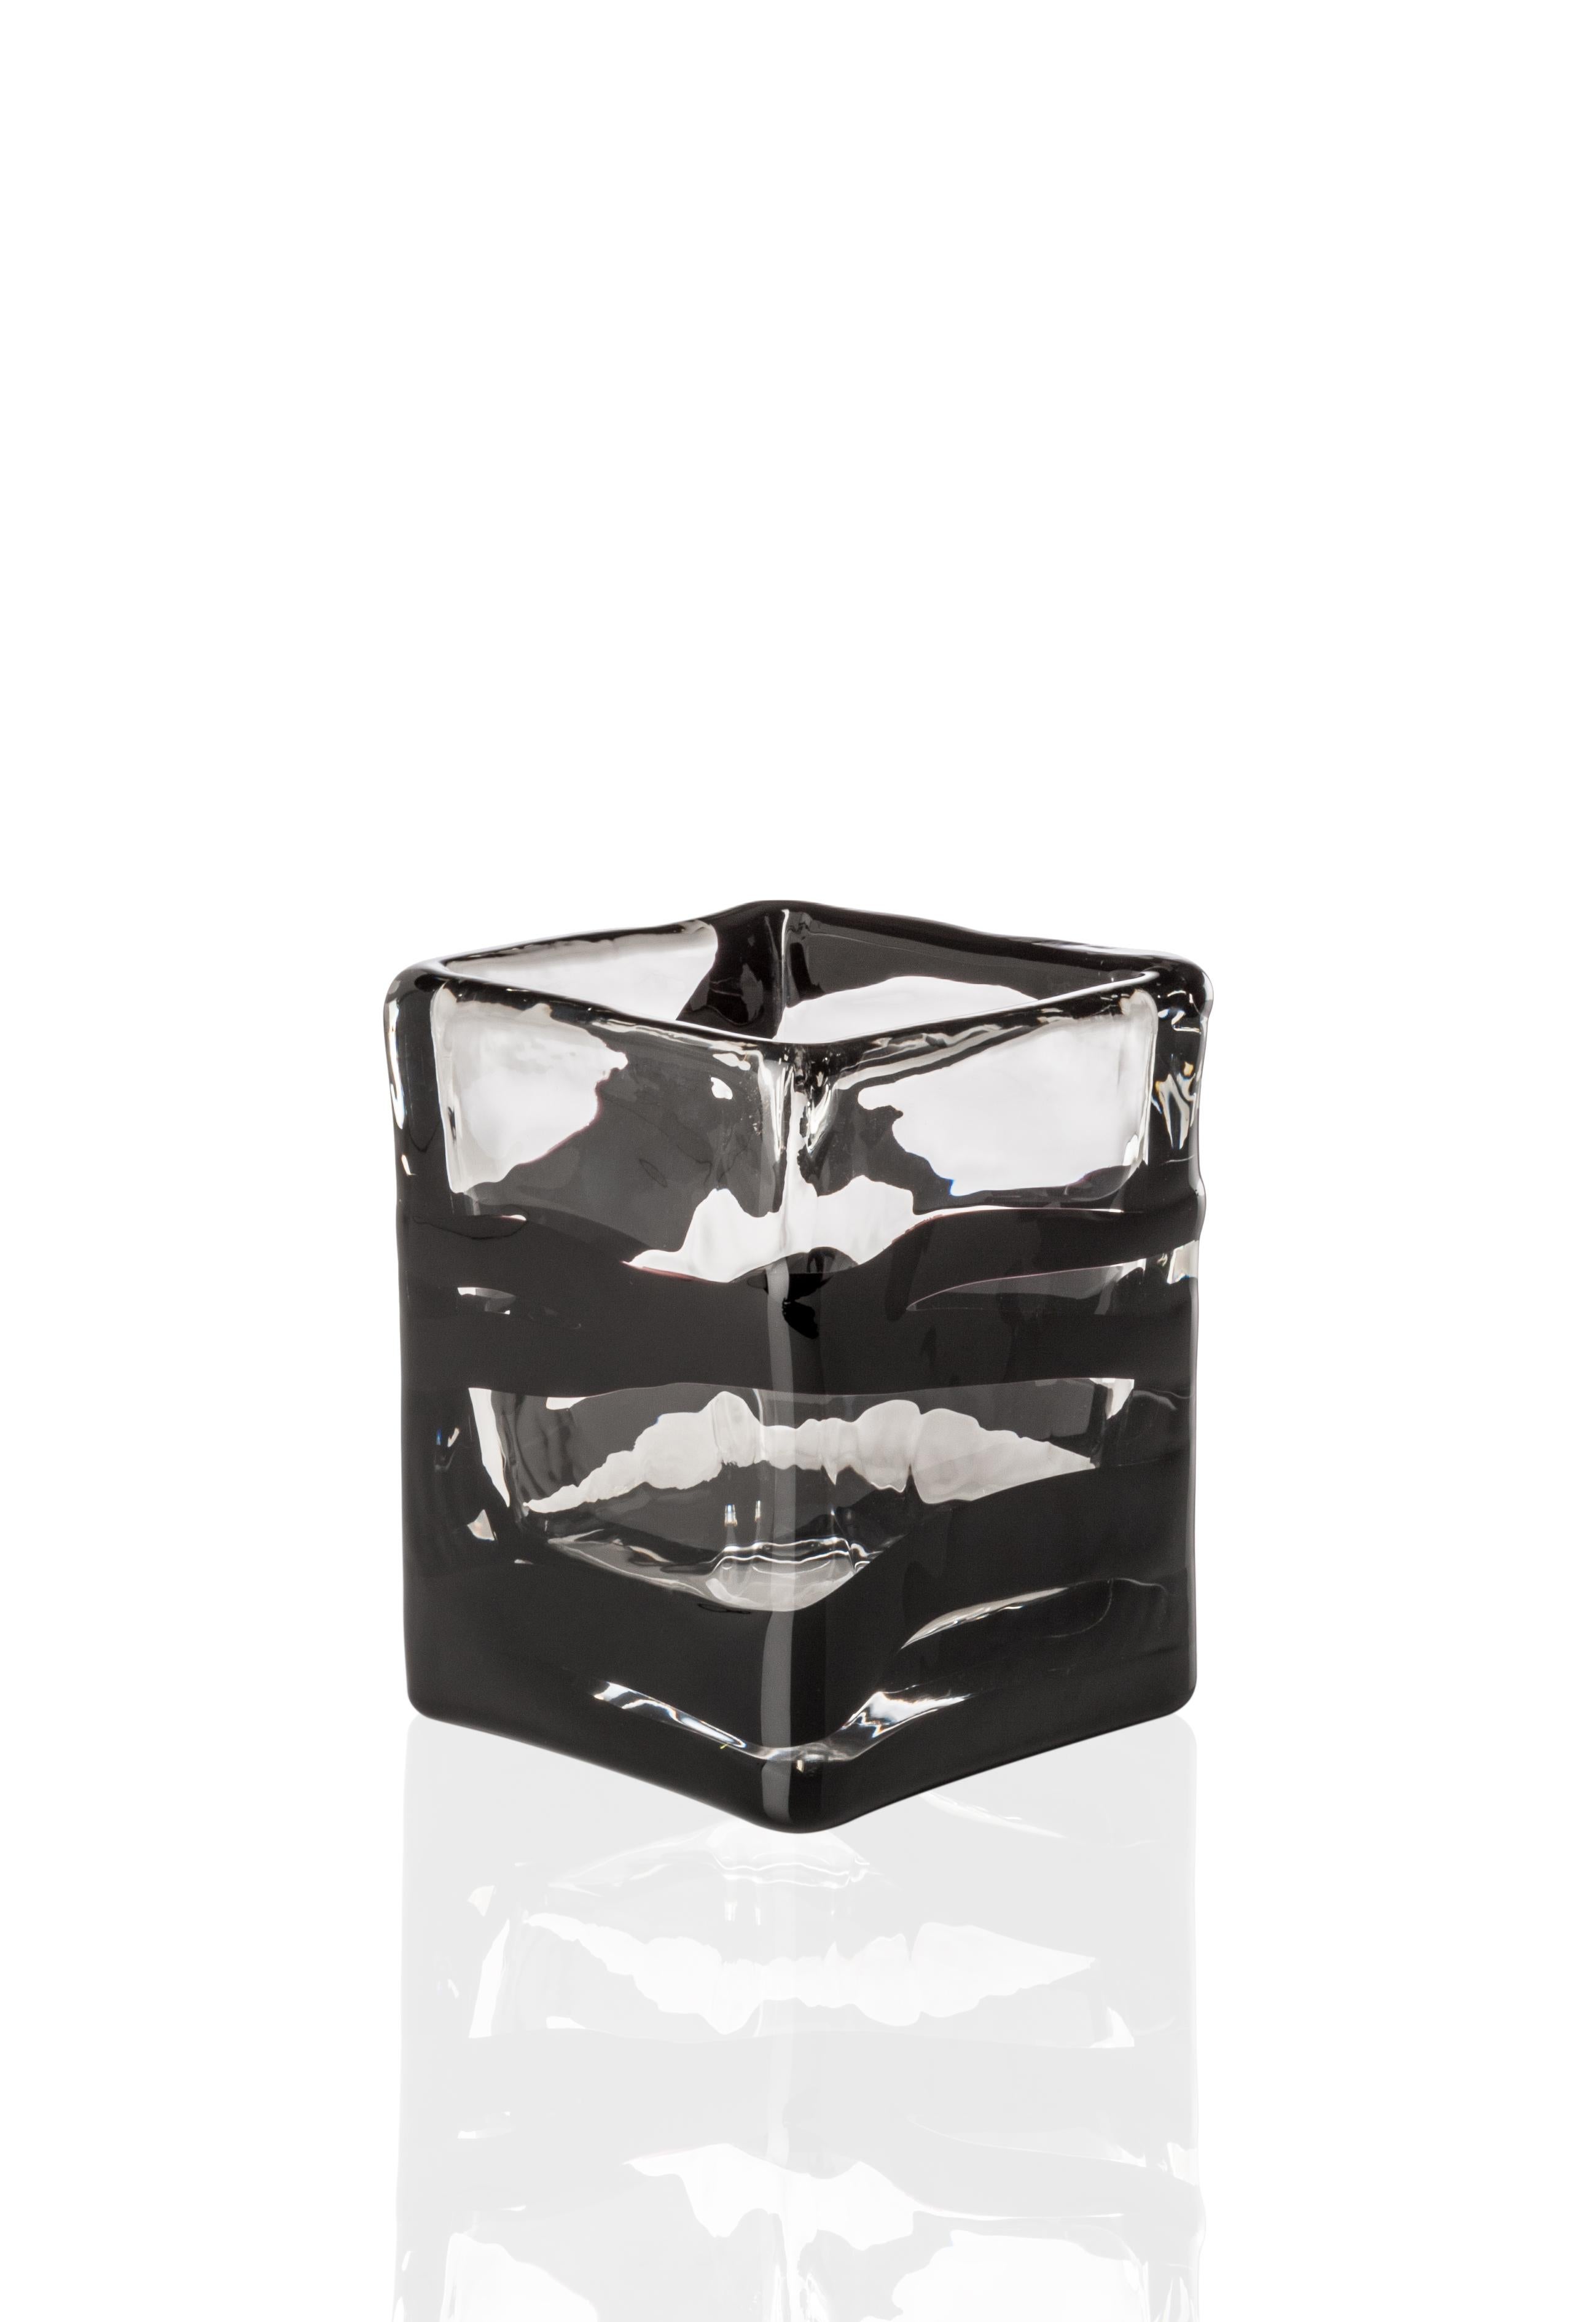 Venini glass vase in transparent crystal with black decoration designed by Peter Marino in 2017. Perfect for indoor home decor as container or statement piece for any room. Limited edition of only 349 works in stock.

Dimensions: 12 cm D x 12 cm W